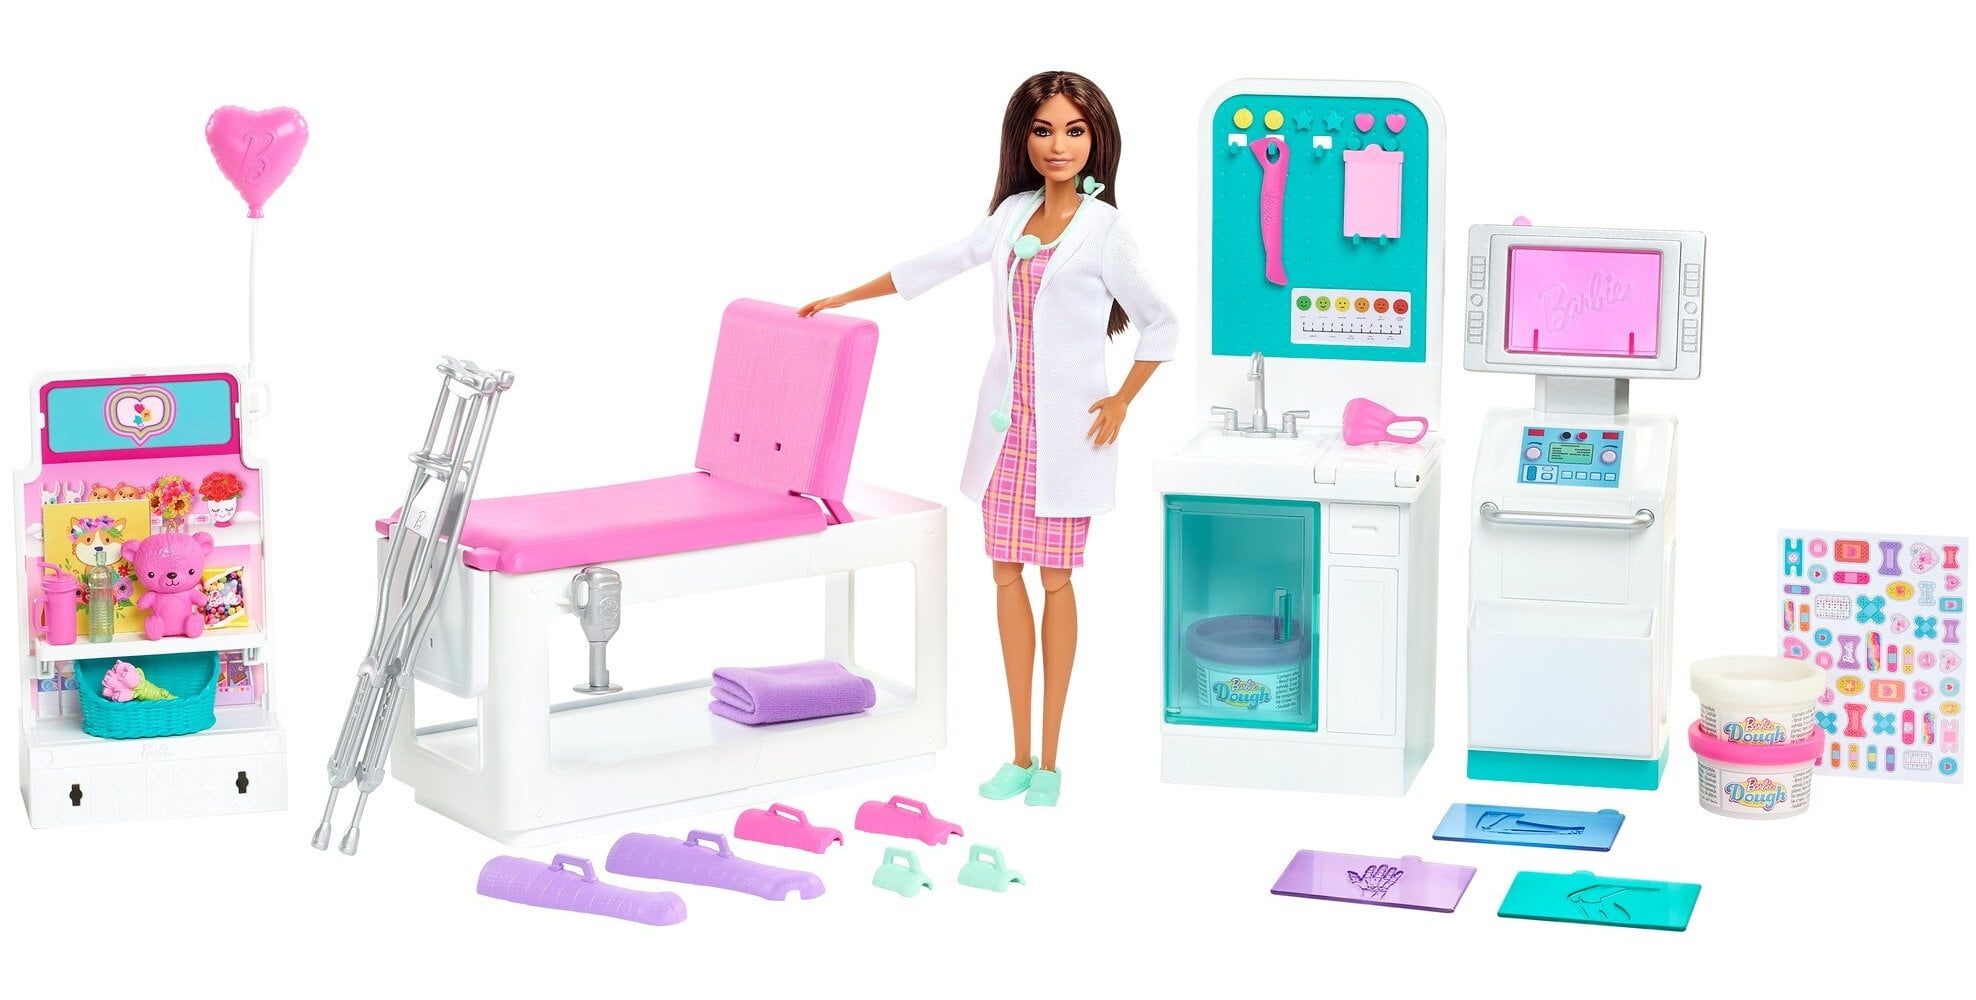 Barbie Fast Cast Clinic Doll & Playset, Brunette Doll & 30+ Accessories Including Molds & Dough